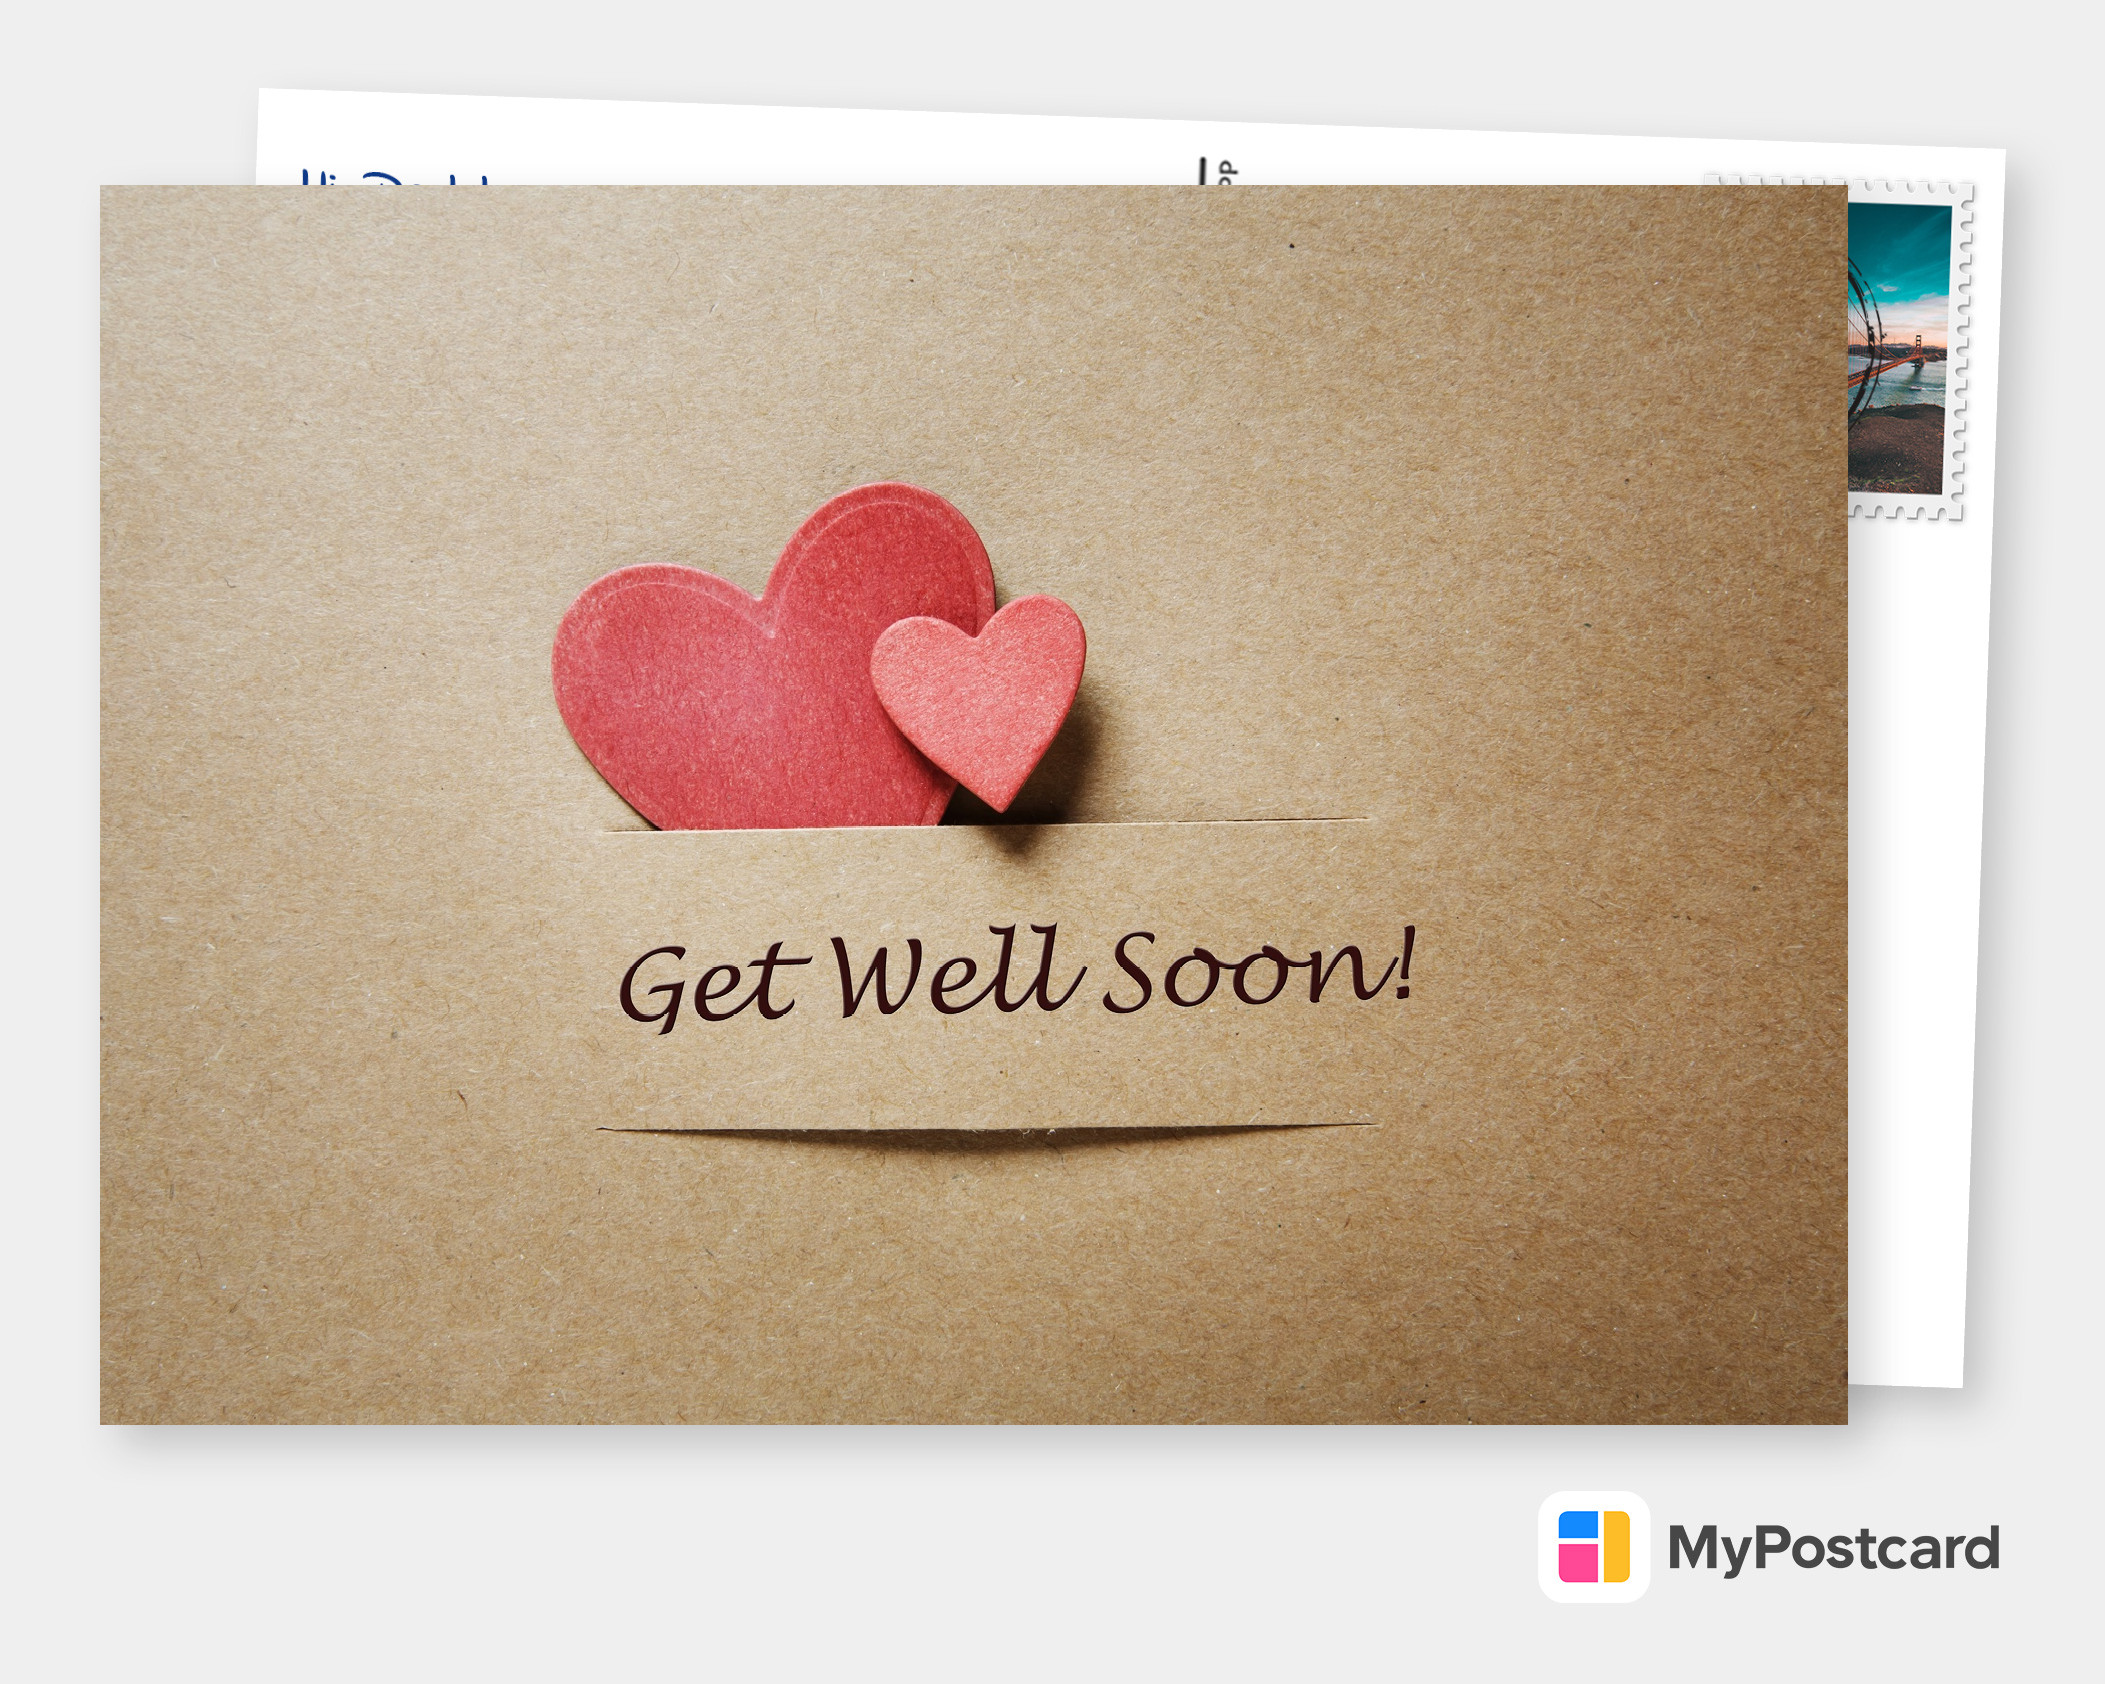 Get well soon cards. 